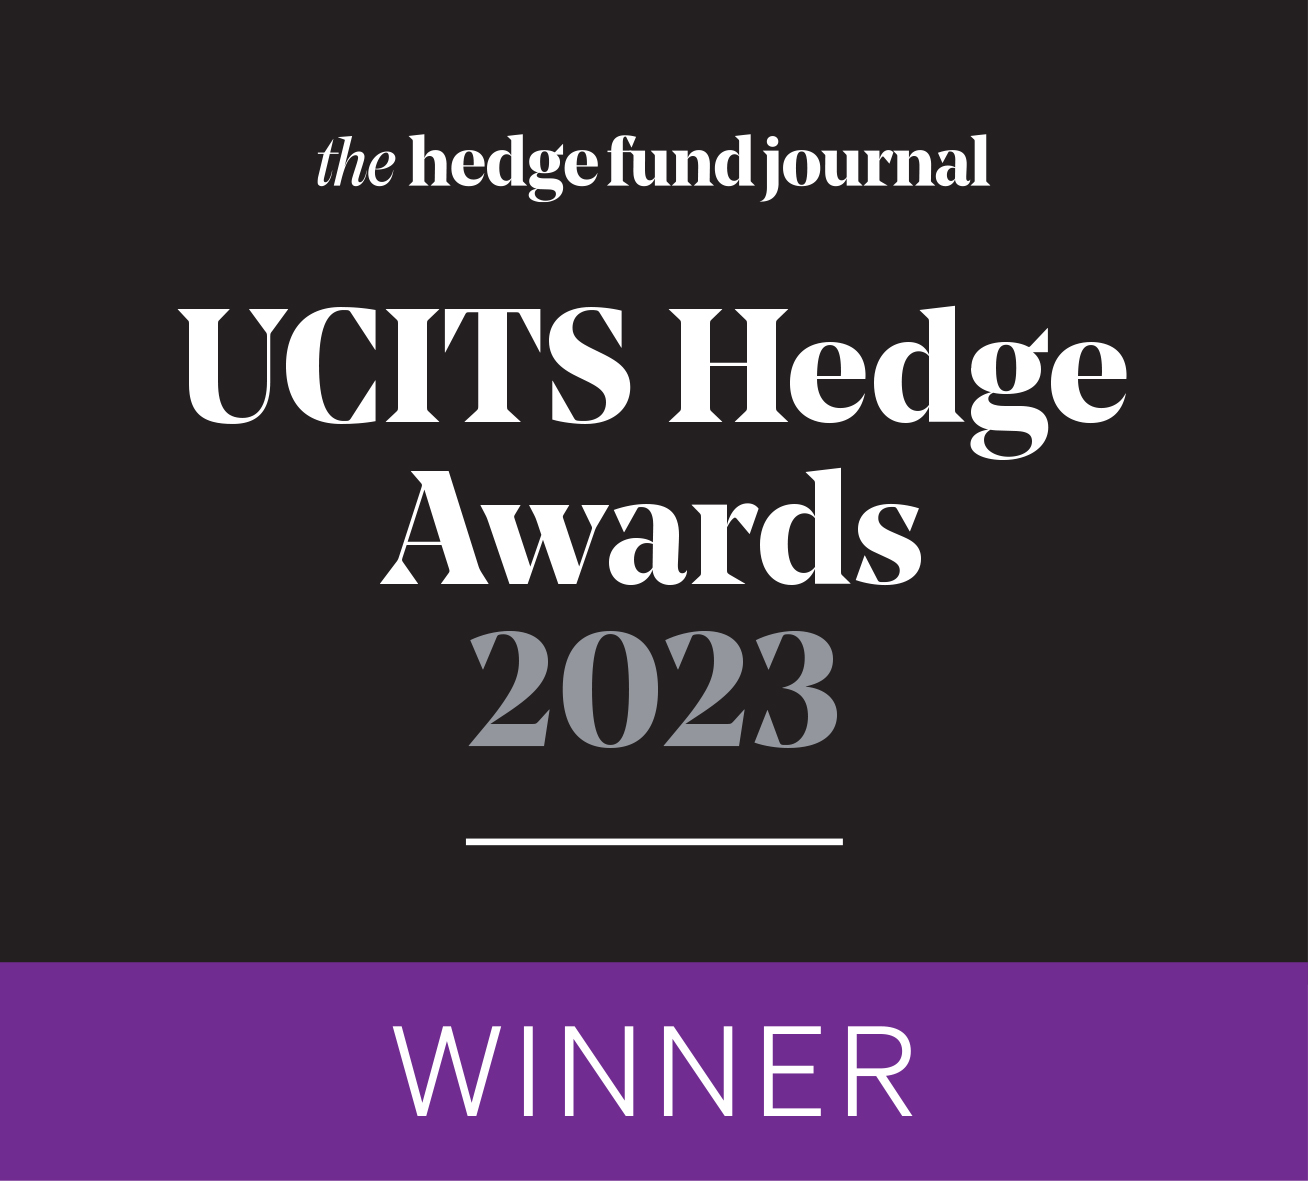 The Hedge Fund Journal - UCITS Hedge Awards 2023 Winner